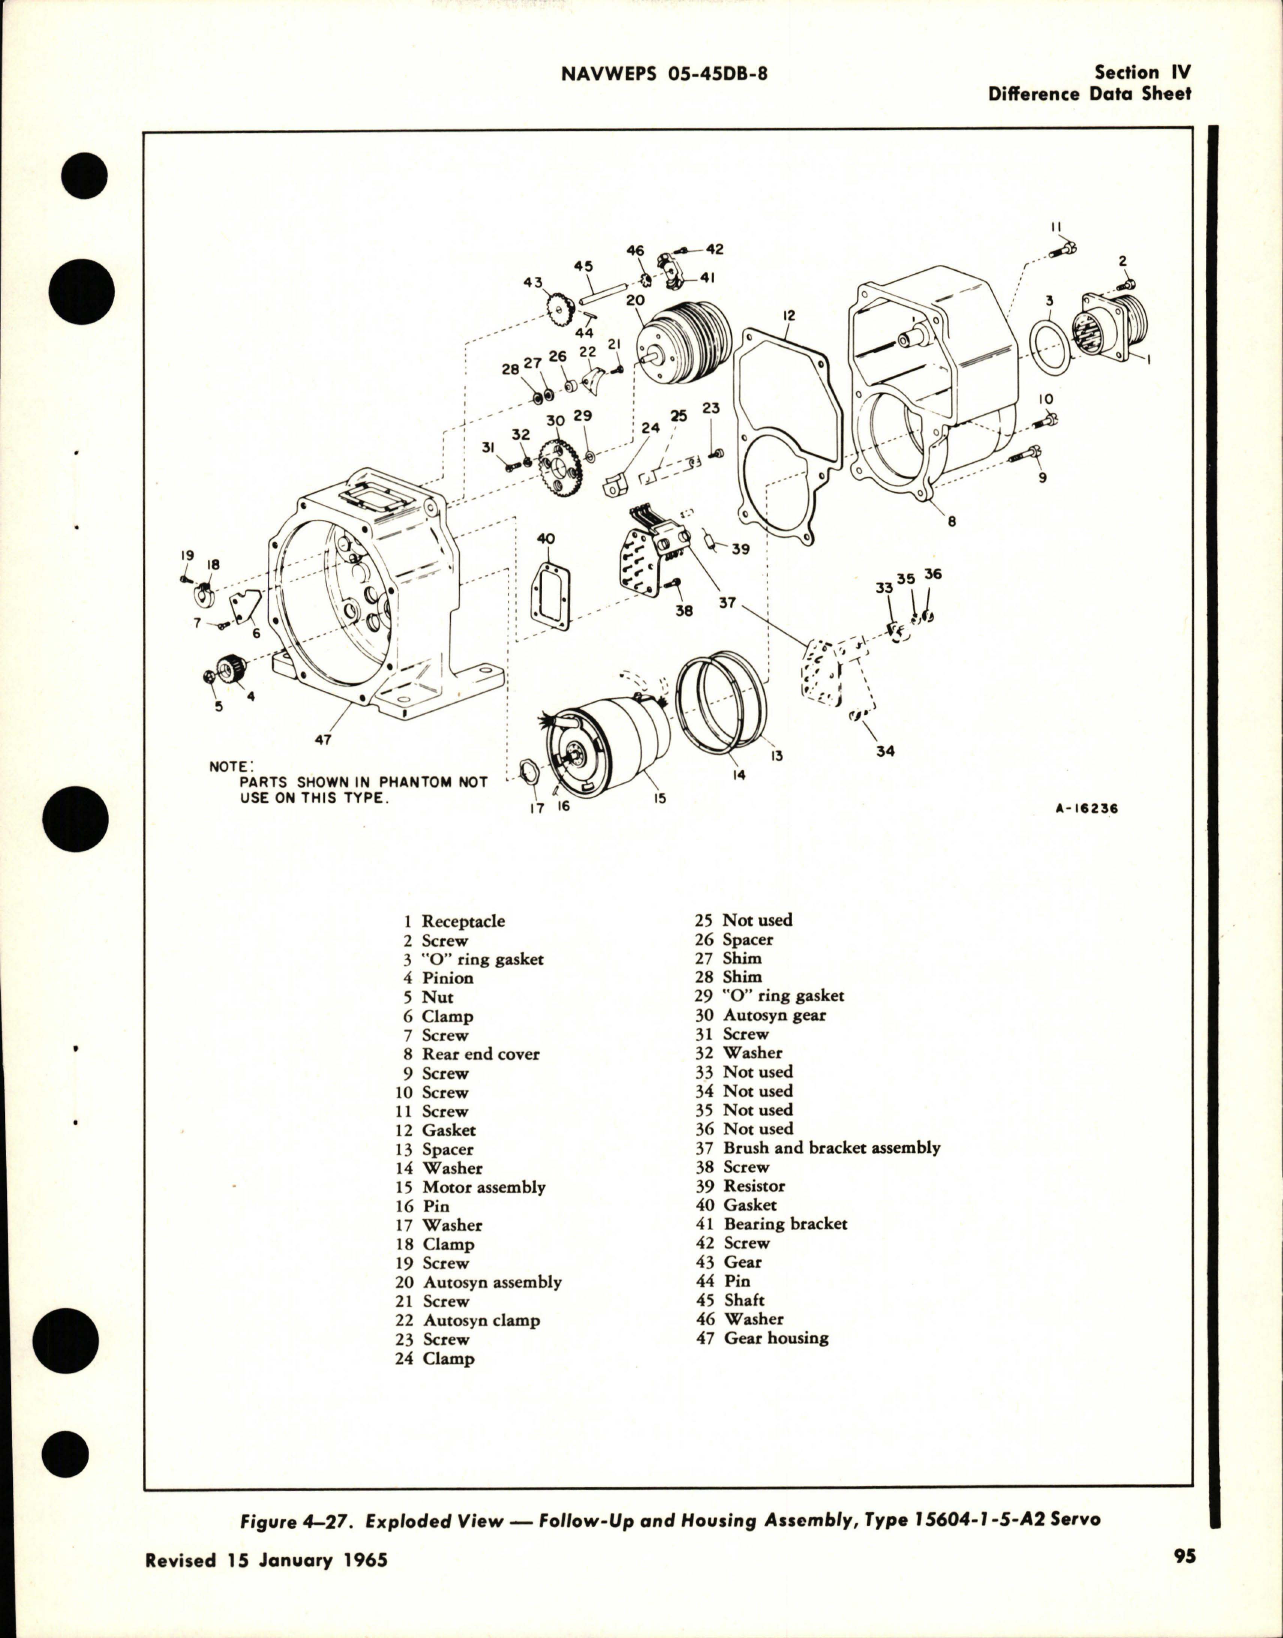 Sample page 7 from AirCorps Library document: Overhaul Instructions for Servos